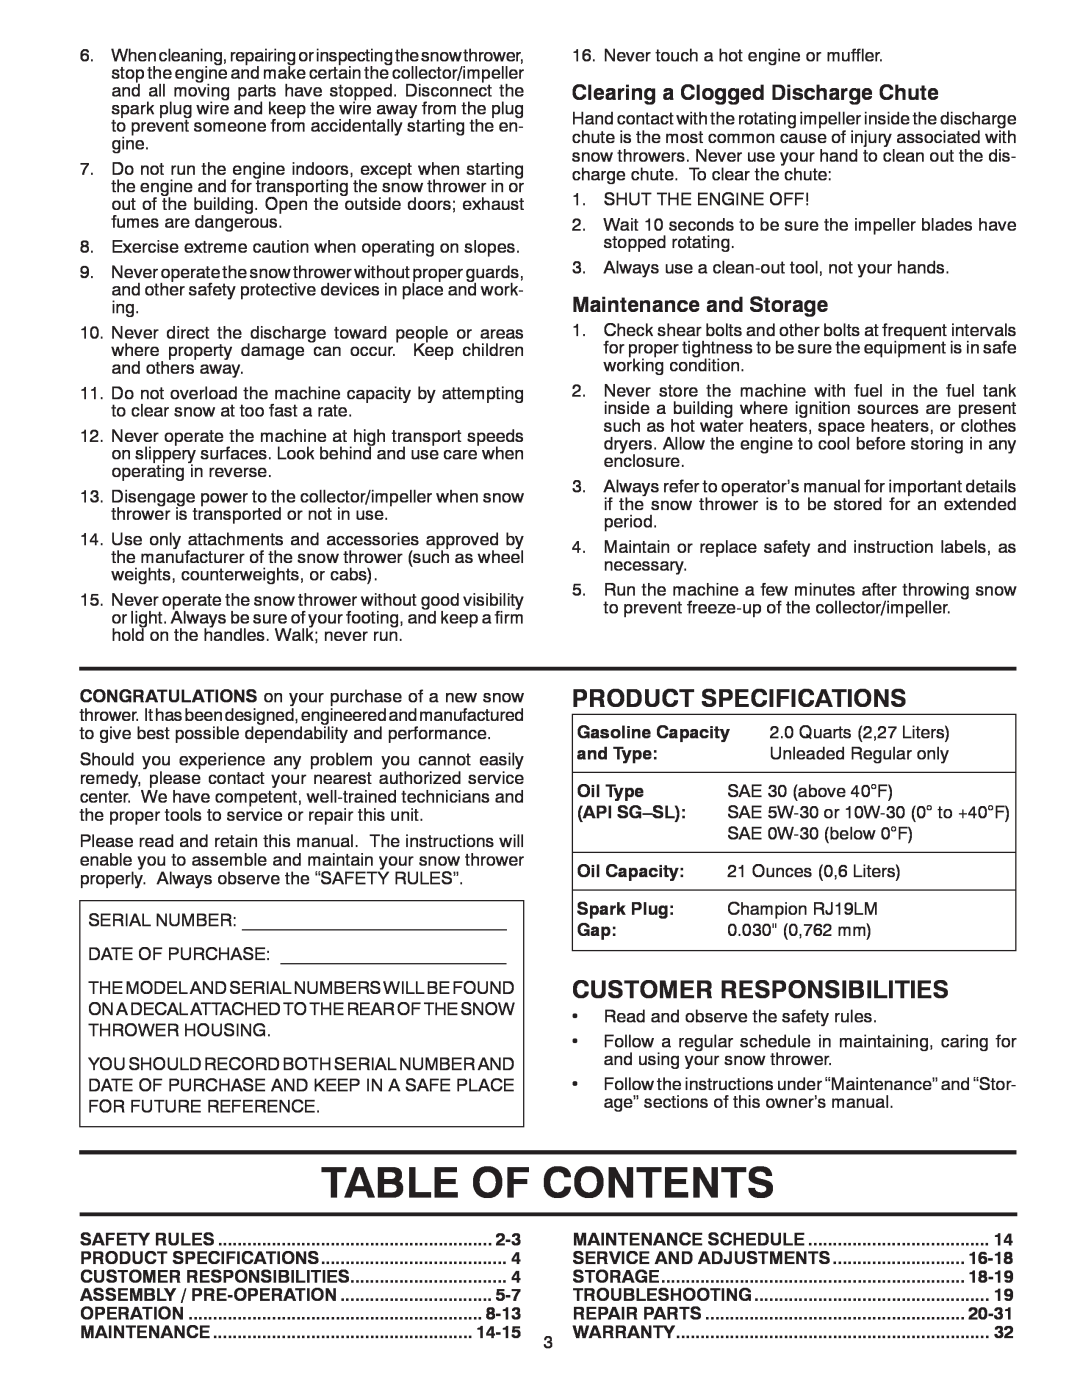 Poulan 418971 Table Of Contents, Product Specifications, Customer Responsibilities, Clearing a Clogged Discharge Chute 